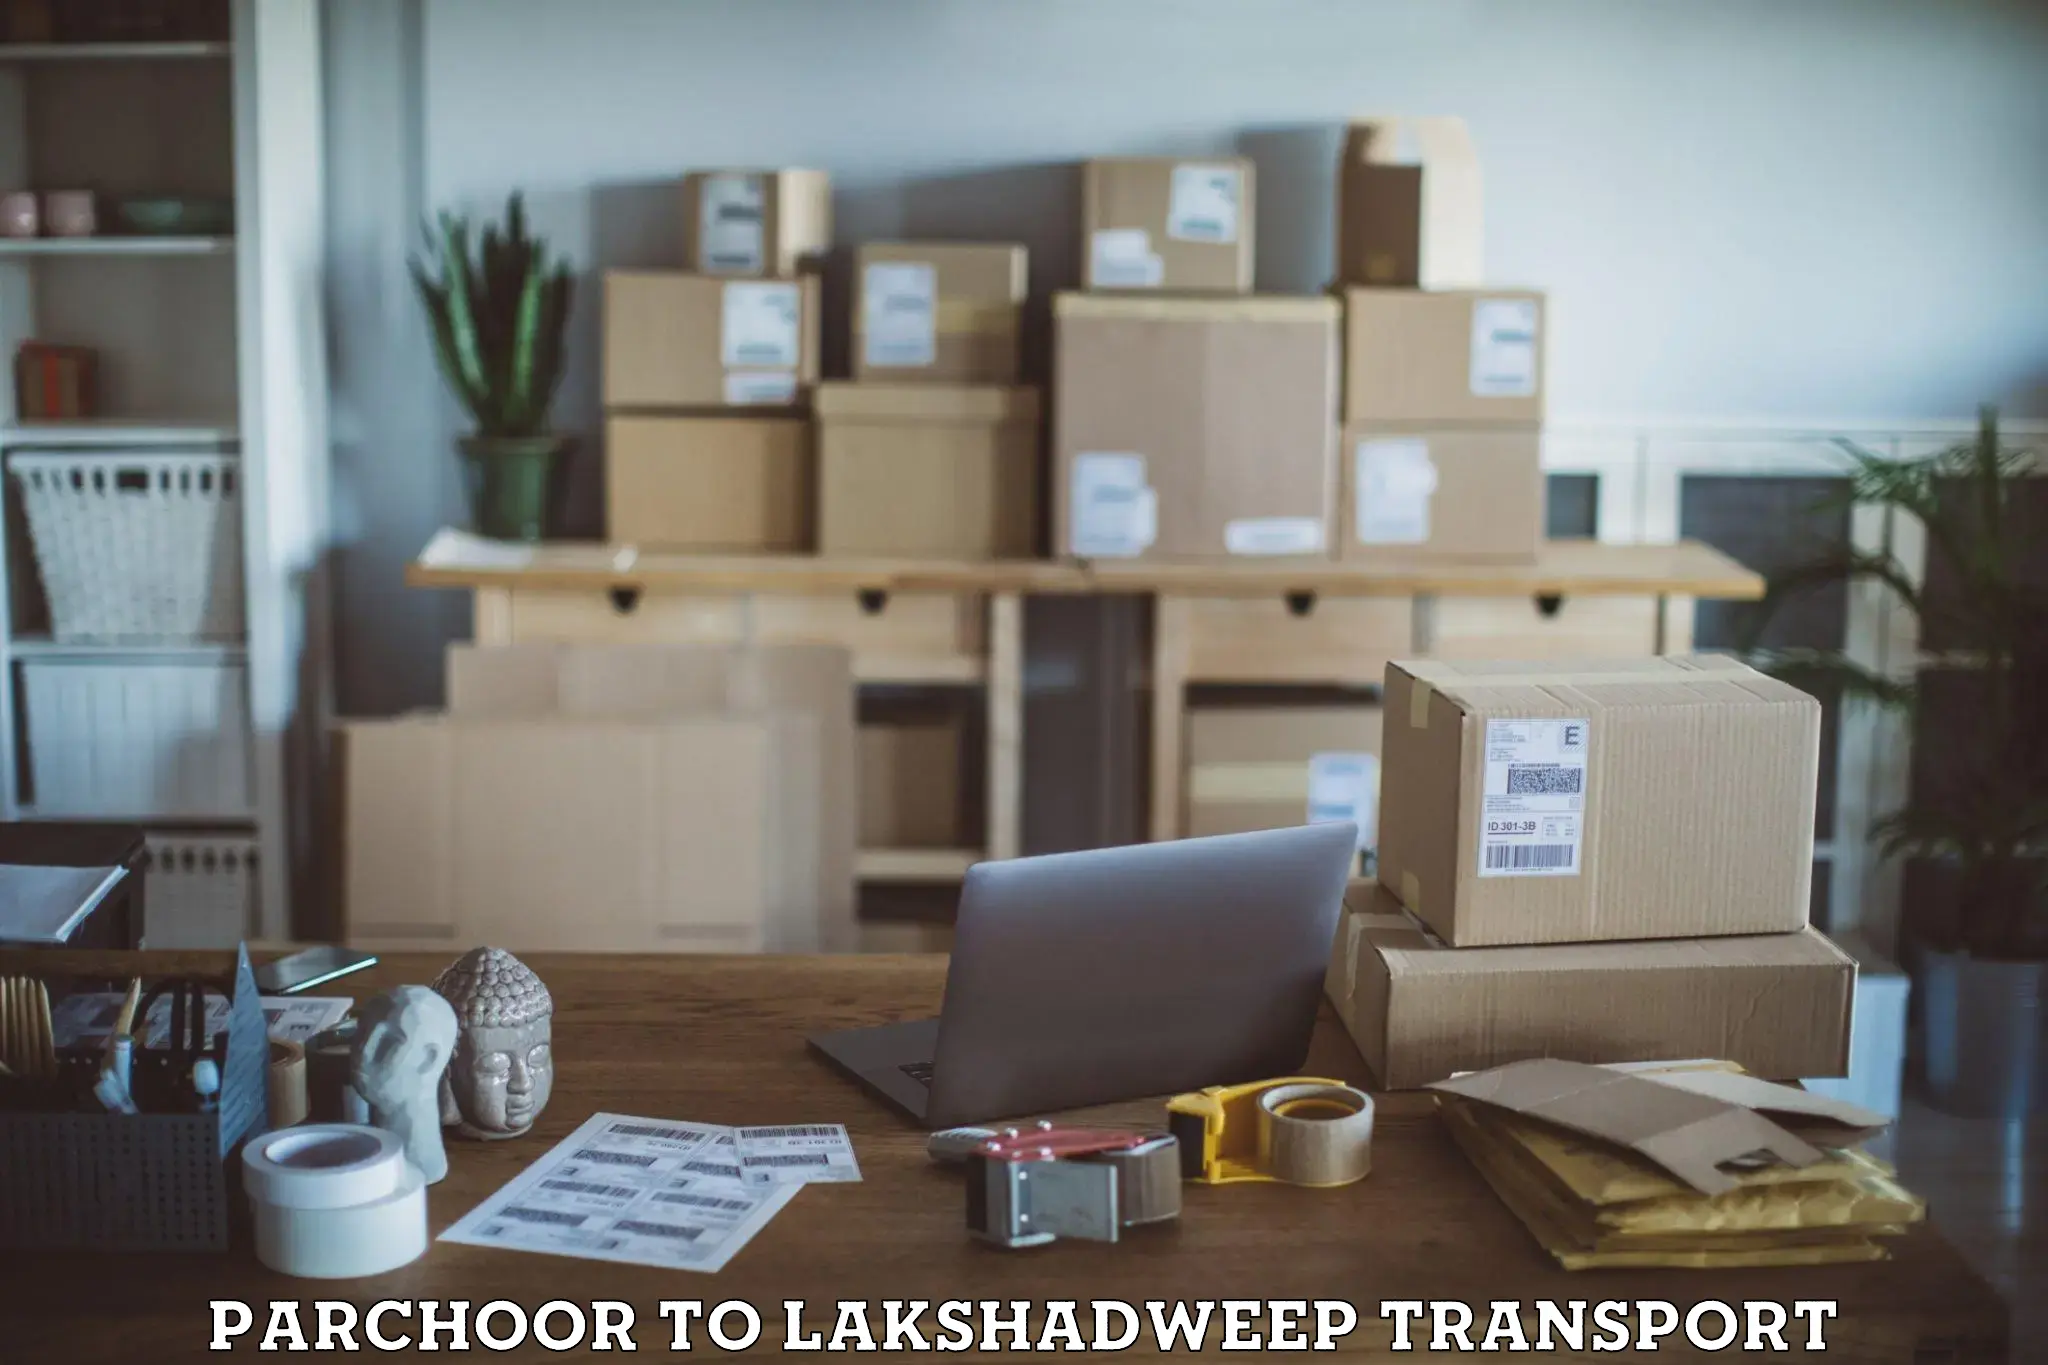 Transport bike from one state to another Parchoor to Lakshadweep